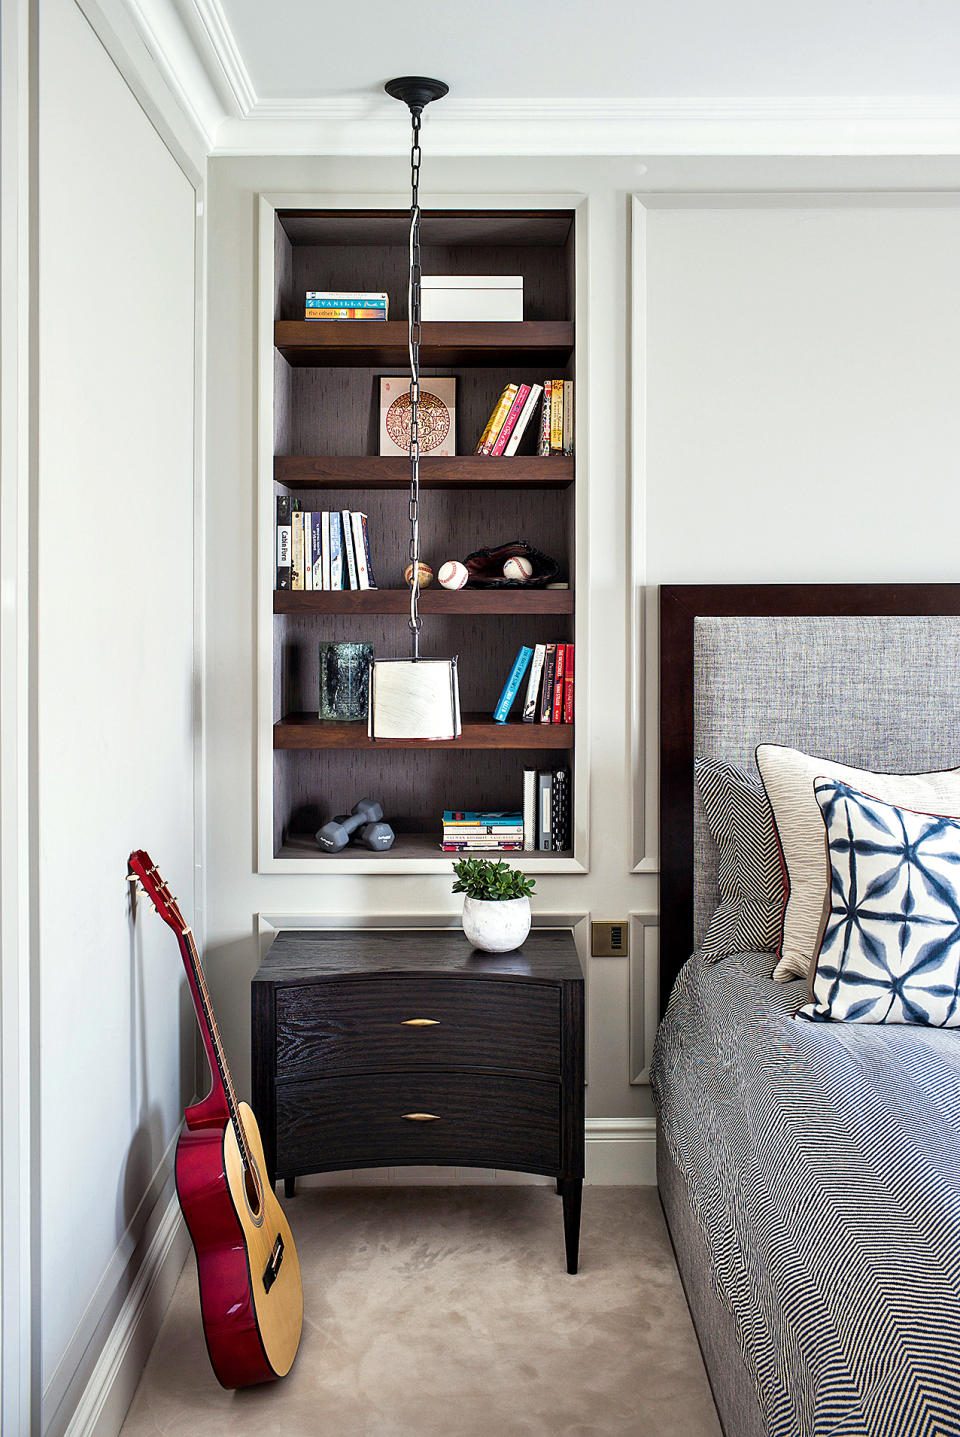 20. BANISH CLUTTER WITH BEAUTIFUL STORAGE